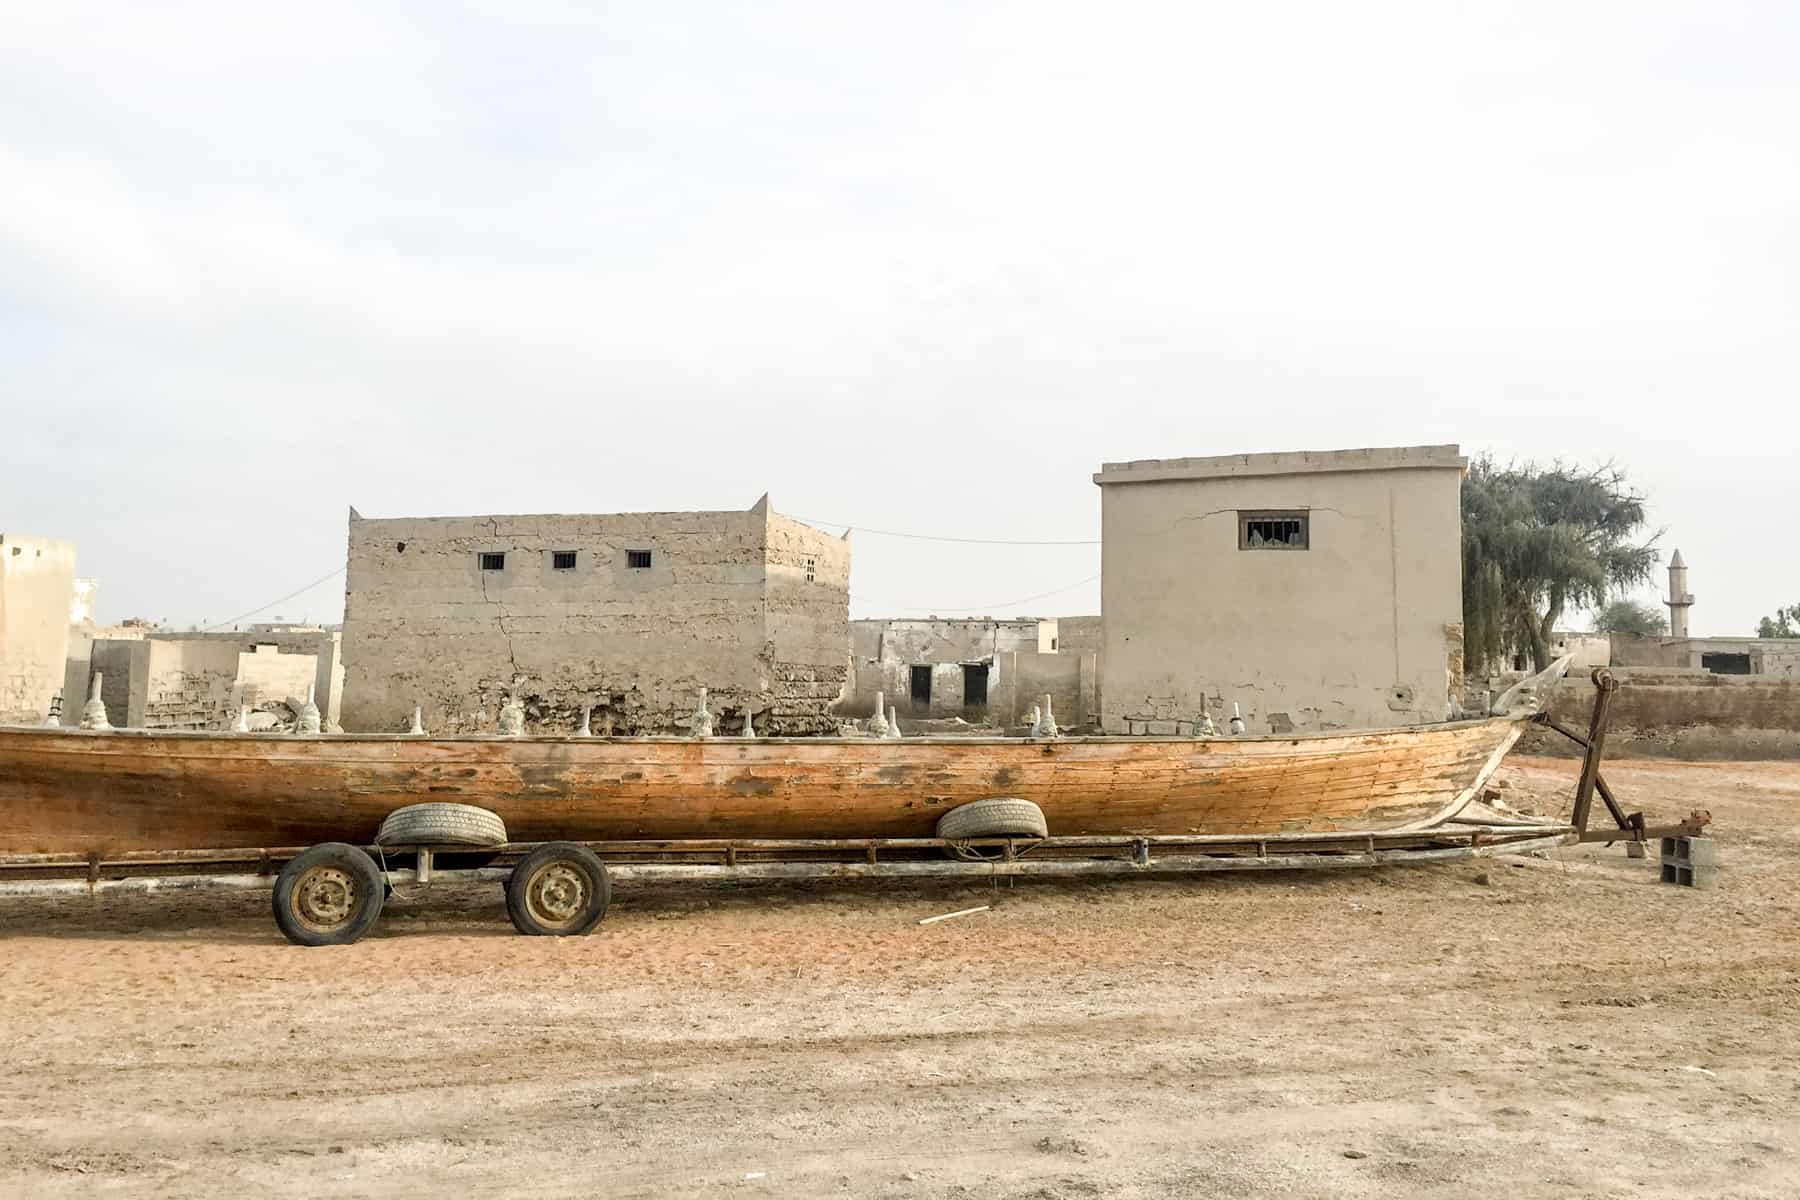 A long, light wooden boat, left abandoned in the orange coated ghost town of Al Jazirat Al Hamra in Ras Al Khaimah. Two deserted block buildings can be seen in the distance. 